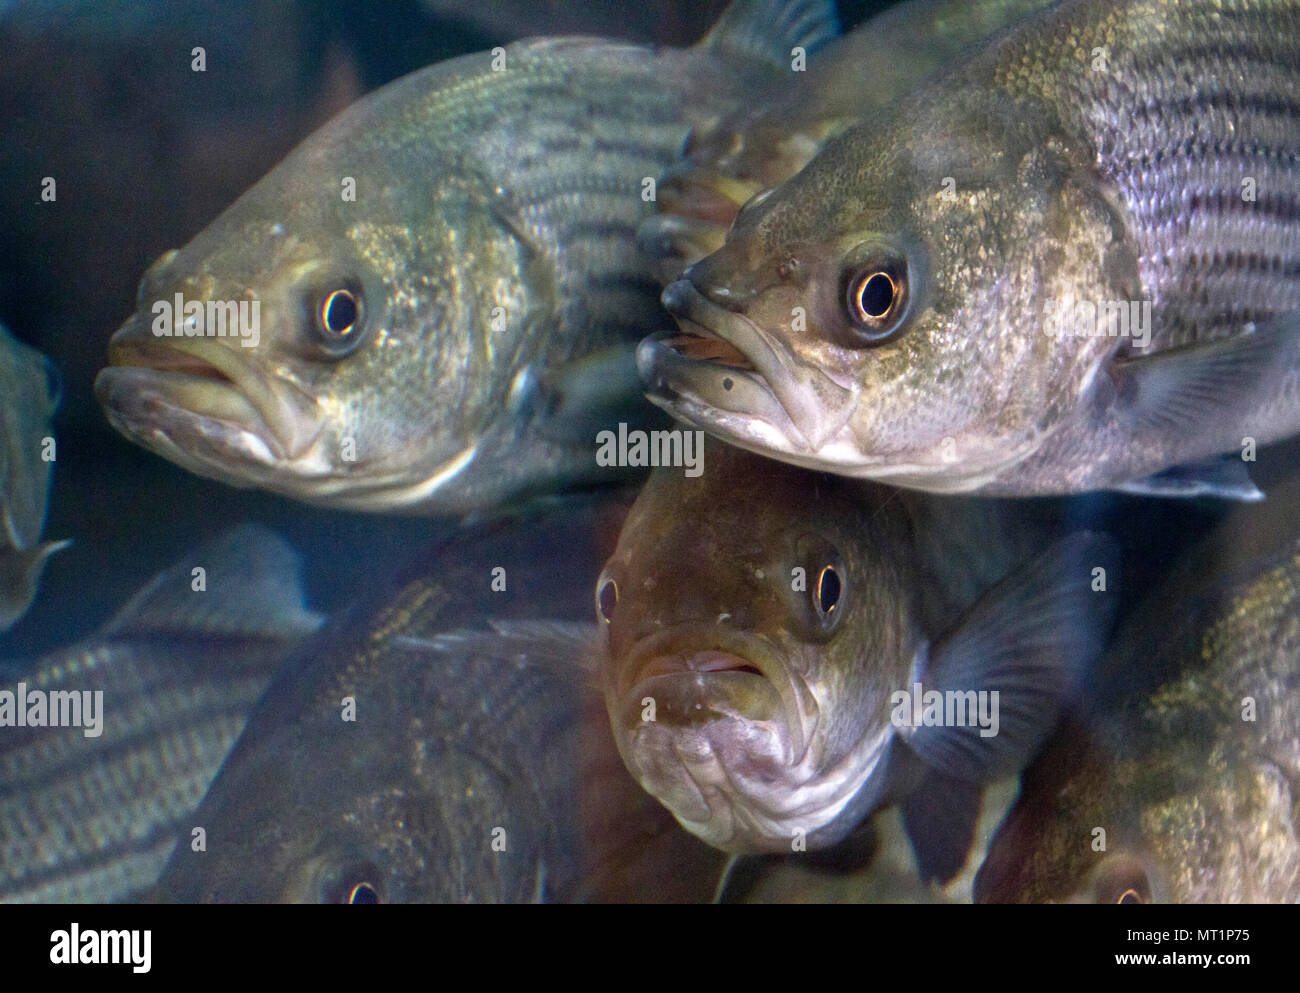 Close up of the wildly expressive faces of striped bass swimming